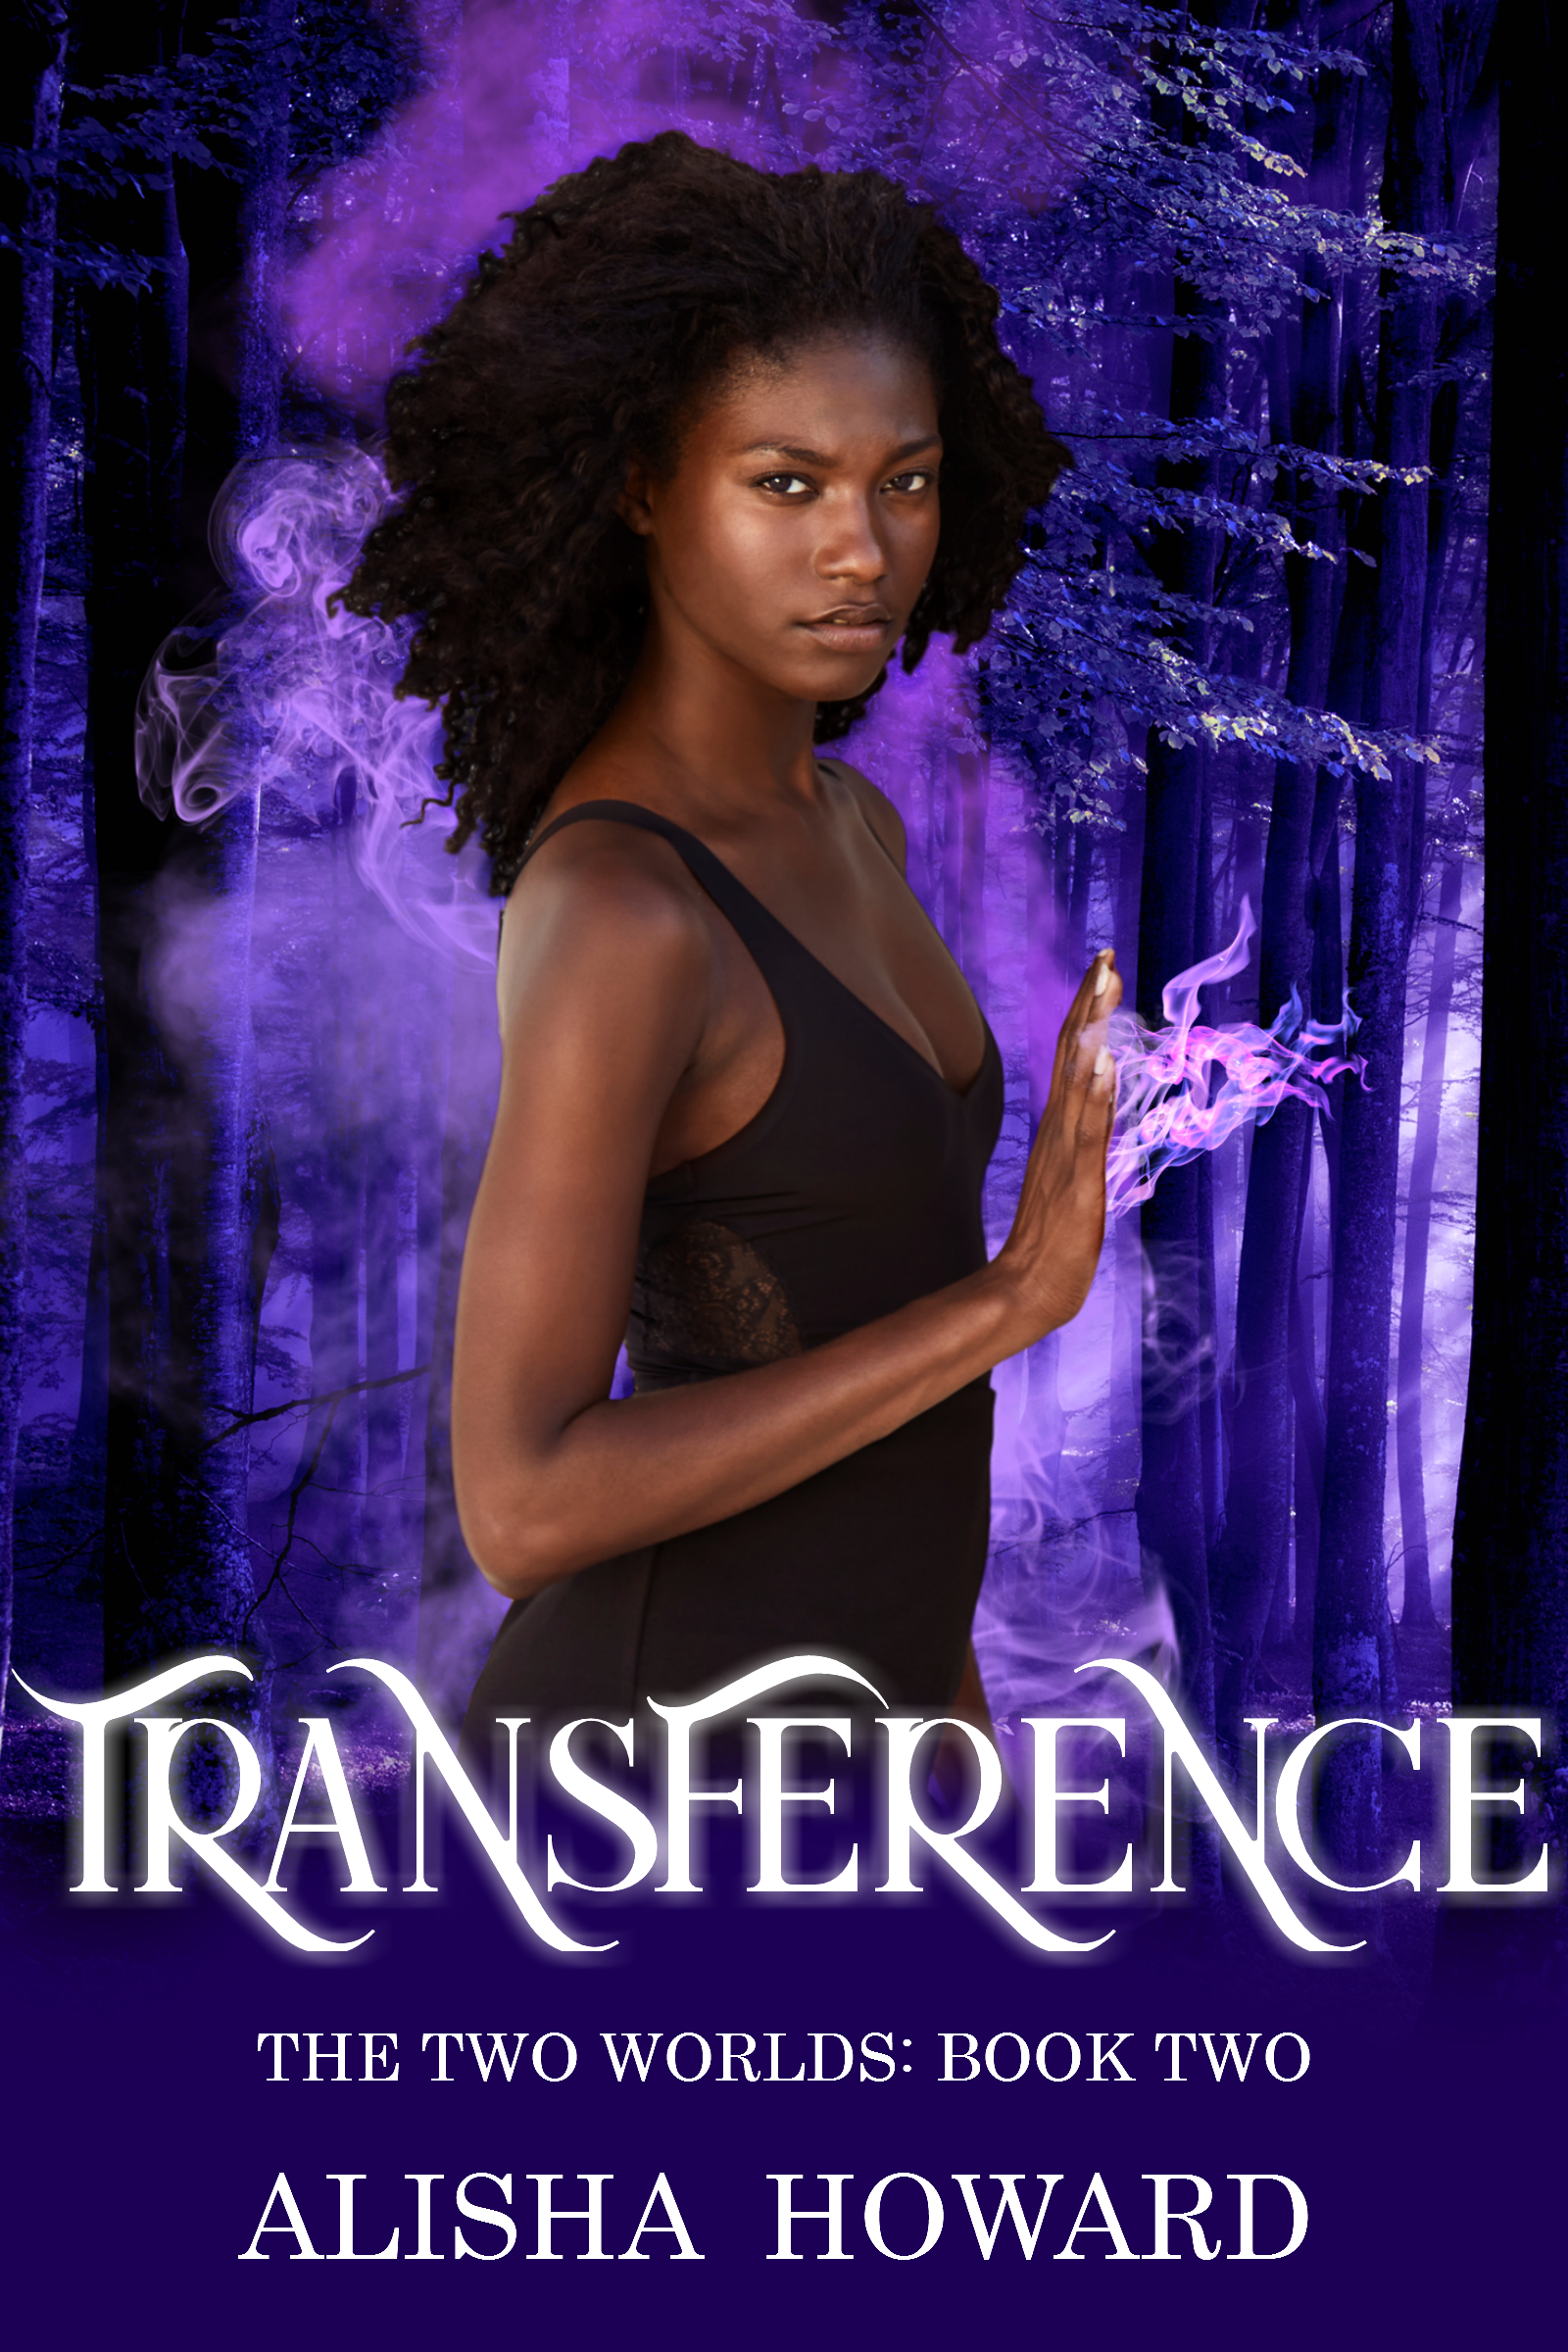 TRANSFERENCE